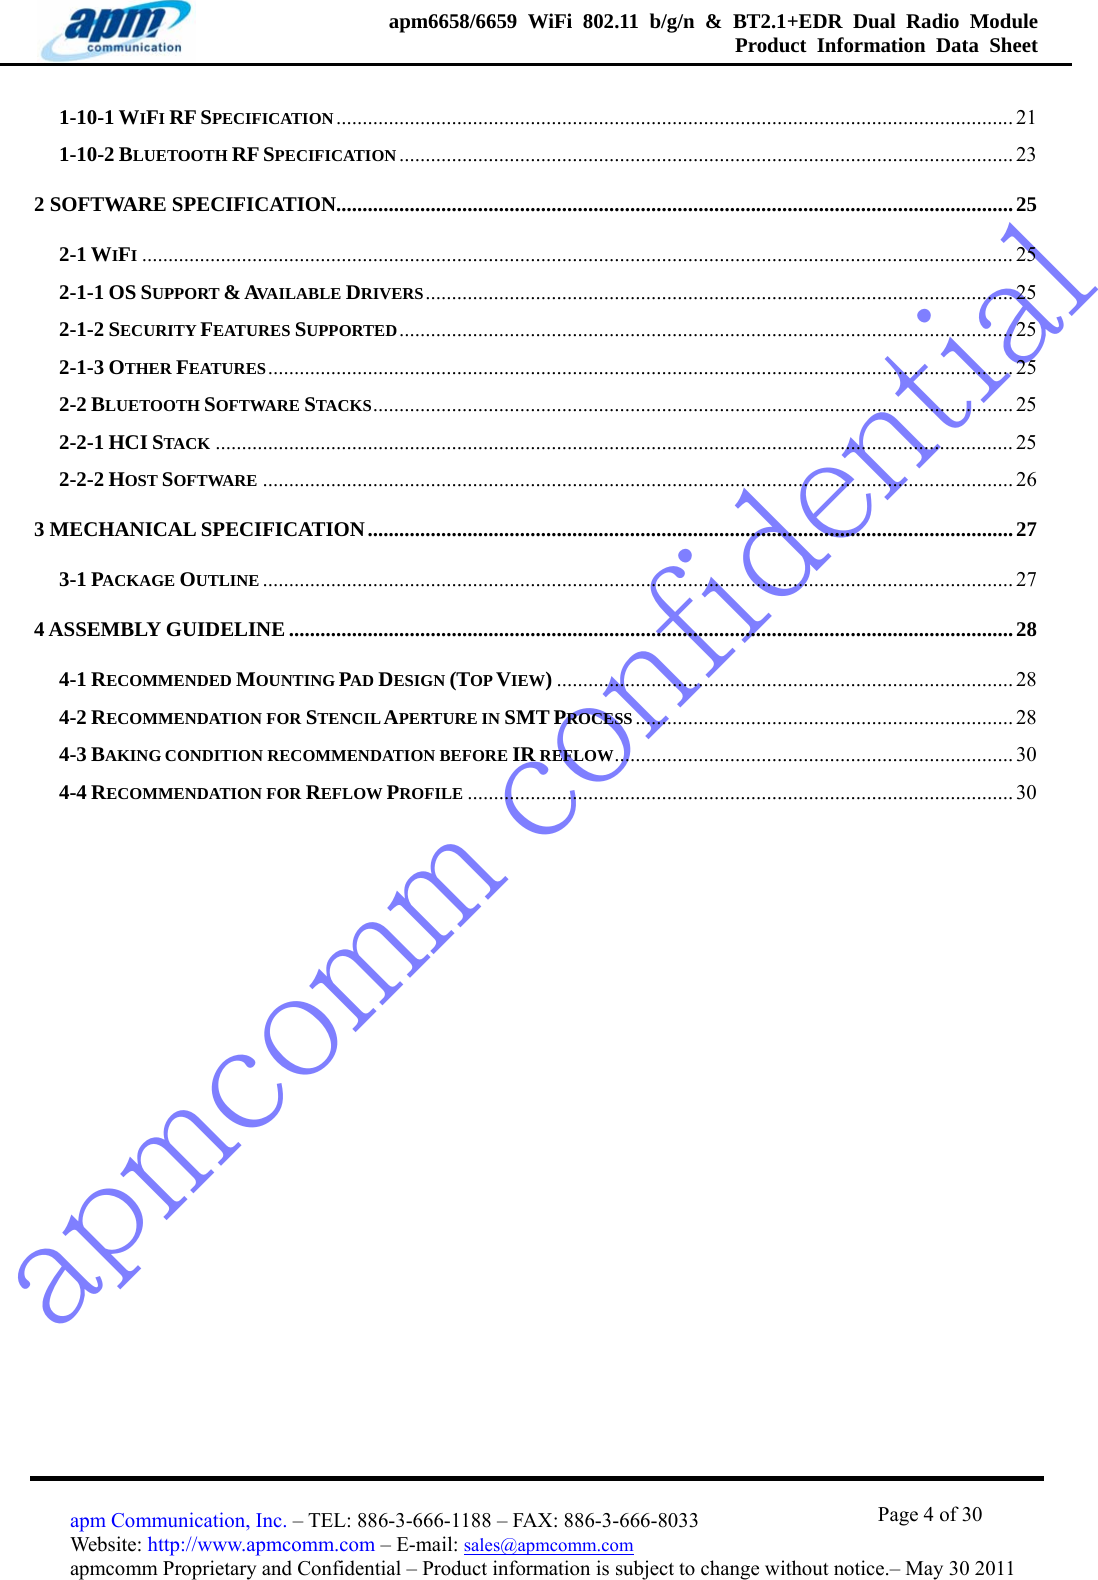 apmcomm confidentialapm6658/6659 WiFi 802.11 b/g/n &amp; BT2.1+EDR Dual Radio Module  Product Information Data Sheet                                       Page 4 of 30 apm Communication, Inc. – TEL: 886-3-666-1188 – FAX: 886-3-666-8033 Website: http://www.apmcomm.com – E-mail: sales@apmcomm.com  apmcomm Proprietary and Confidential – Product information is subject to change without notice.– May 30 2011 1-10-1 WIFI RF SPECIFICATION................................................................................................................................. 21 1-10-2 BLUETOOTH RF SPECIFICATION ..................................................................................................................... 23 2 SOFTWARE SPECIFICATION.................................................................................................................................25 2-1 WIFI...................................................................................................................................................................... 25 2-1-1 OS SUPPORT &amp; AVAILABLE DRIVERS................................................................................................................ 25 2-1-2 SECURITY FEATURES SUPPORTED..................................................................................................................... 25 2-1-3 OTHER FEATURES.............................................................................................................................................. 25 2-2 BLUETOOTH SOFTWARE STACKS.......................................................................................................................... 25 2-2-1 HCI STACK ........................................................................................................................................................ 25 2-2-2 HOST SOFTWARE ............................................................................................................................................... 26 3 MECHANICAL SPECIFICATION...........................................................................................................................27 3-1 PACKAGE OUTLINE ............................................................................................................................................... 27 4 ASSEMBLY GUIDELINE..........................................................................................................................................28 4-1 RECOMMENDED MOUNTING PAD DESIGN (TOP VIEW)....................................................................................... 28 4-2 RECOMMENDATION FOR STENCIL APERTURE IN SMT PROCESS ........................................................................ 28 4-3 BAKING CONDITION RECOMMENDATION BEFORE IR REFLOW............................................................................ 30 4-4 RECOMMENDATION FOR REFLOW PROFILE ........................................................................................................ 30  